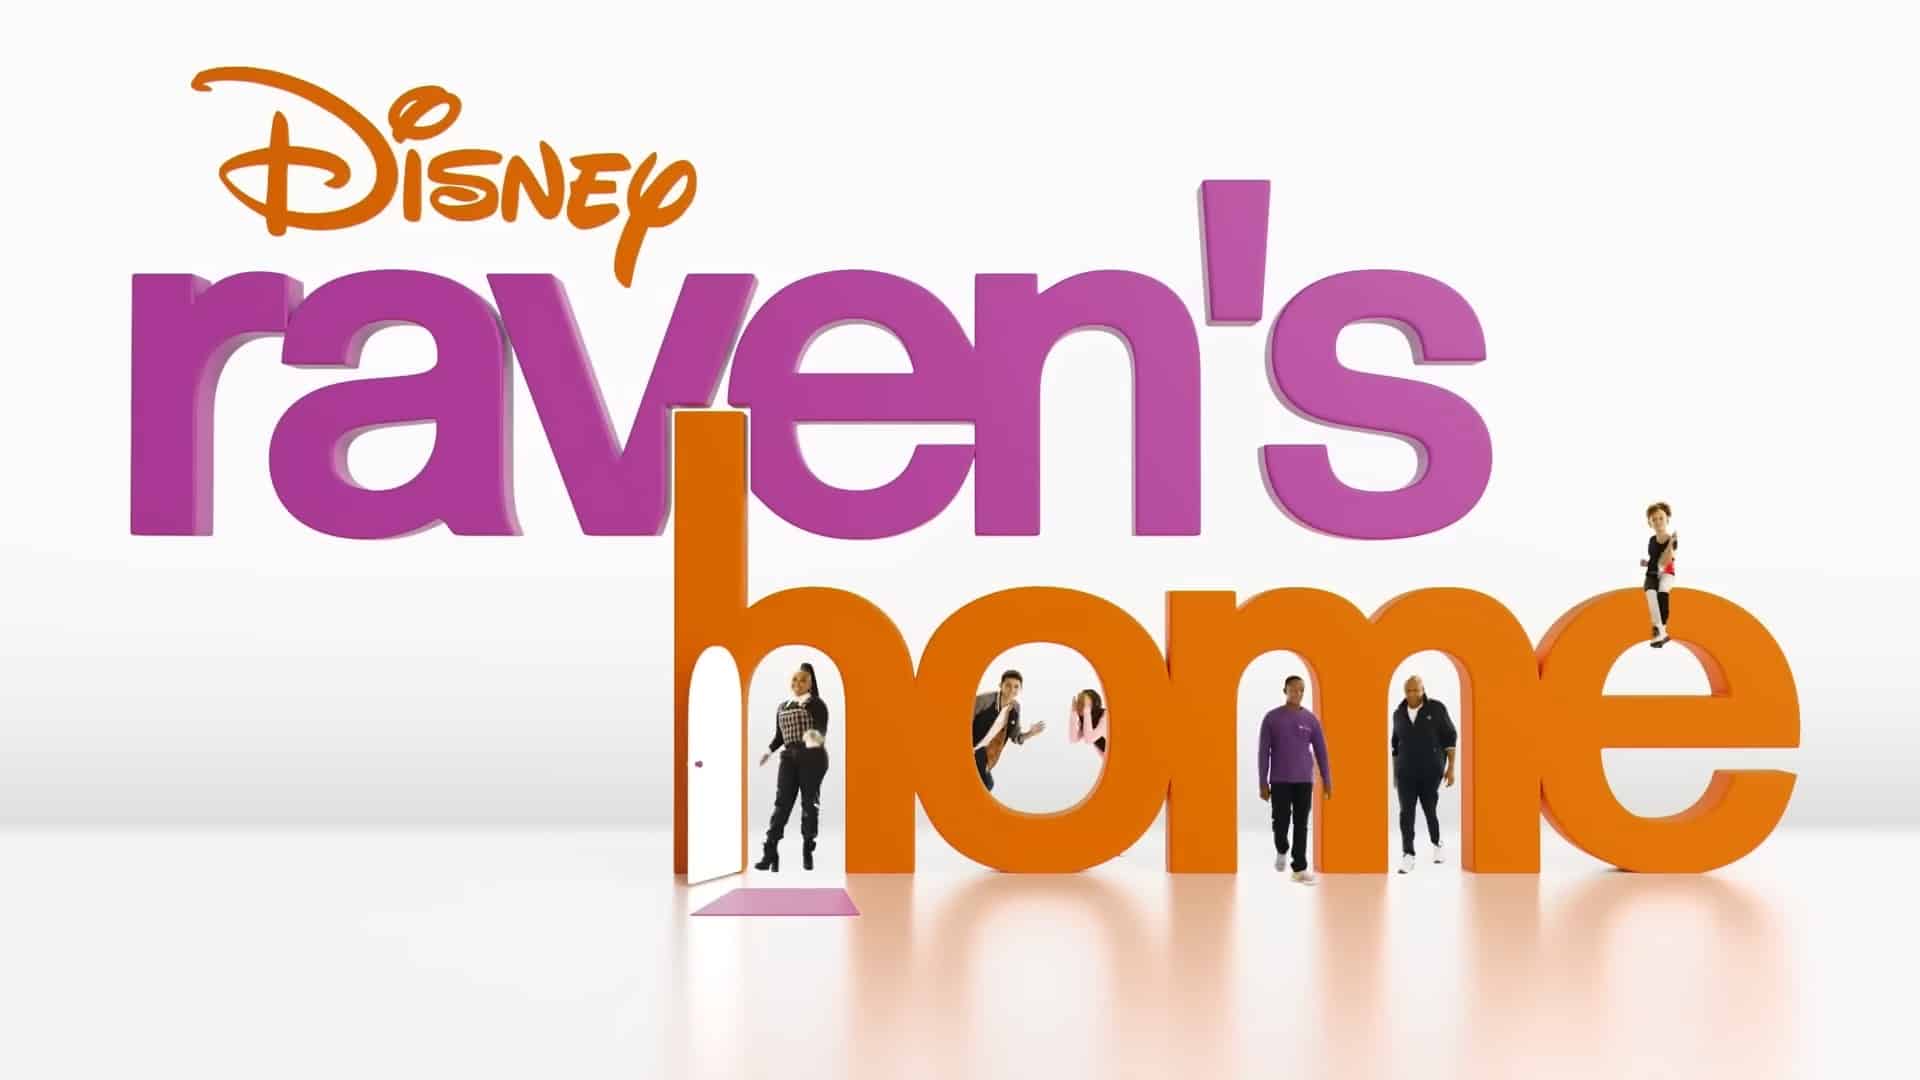 Raven's Home Poster